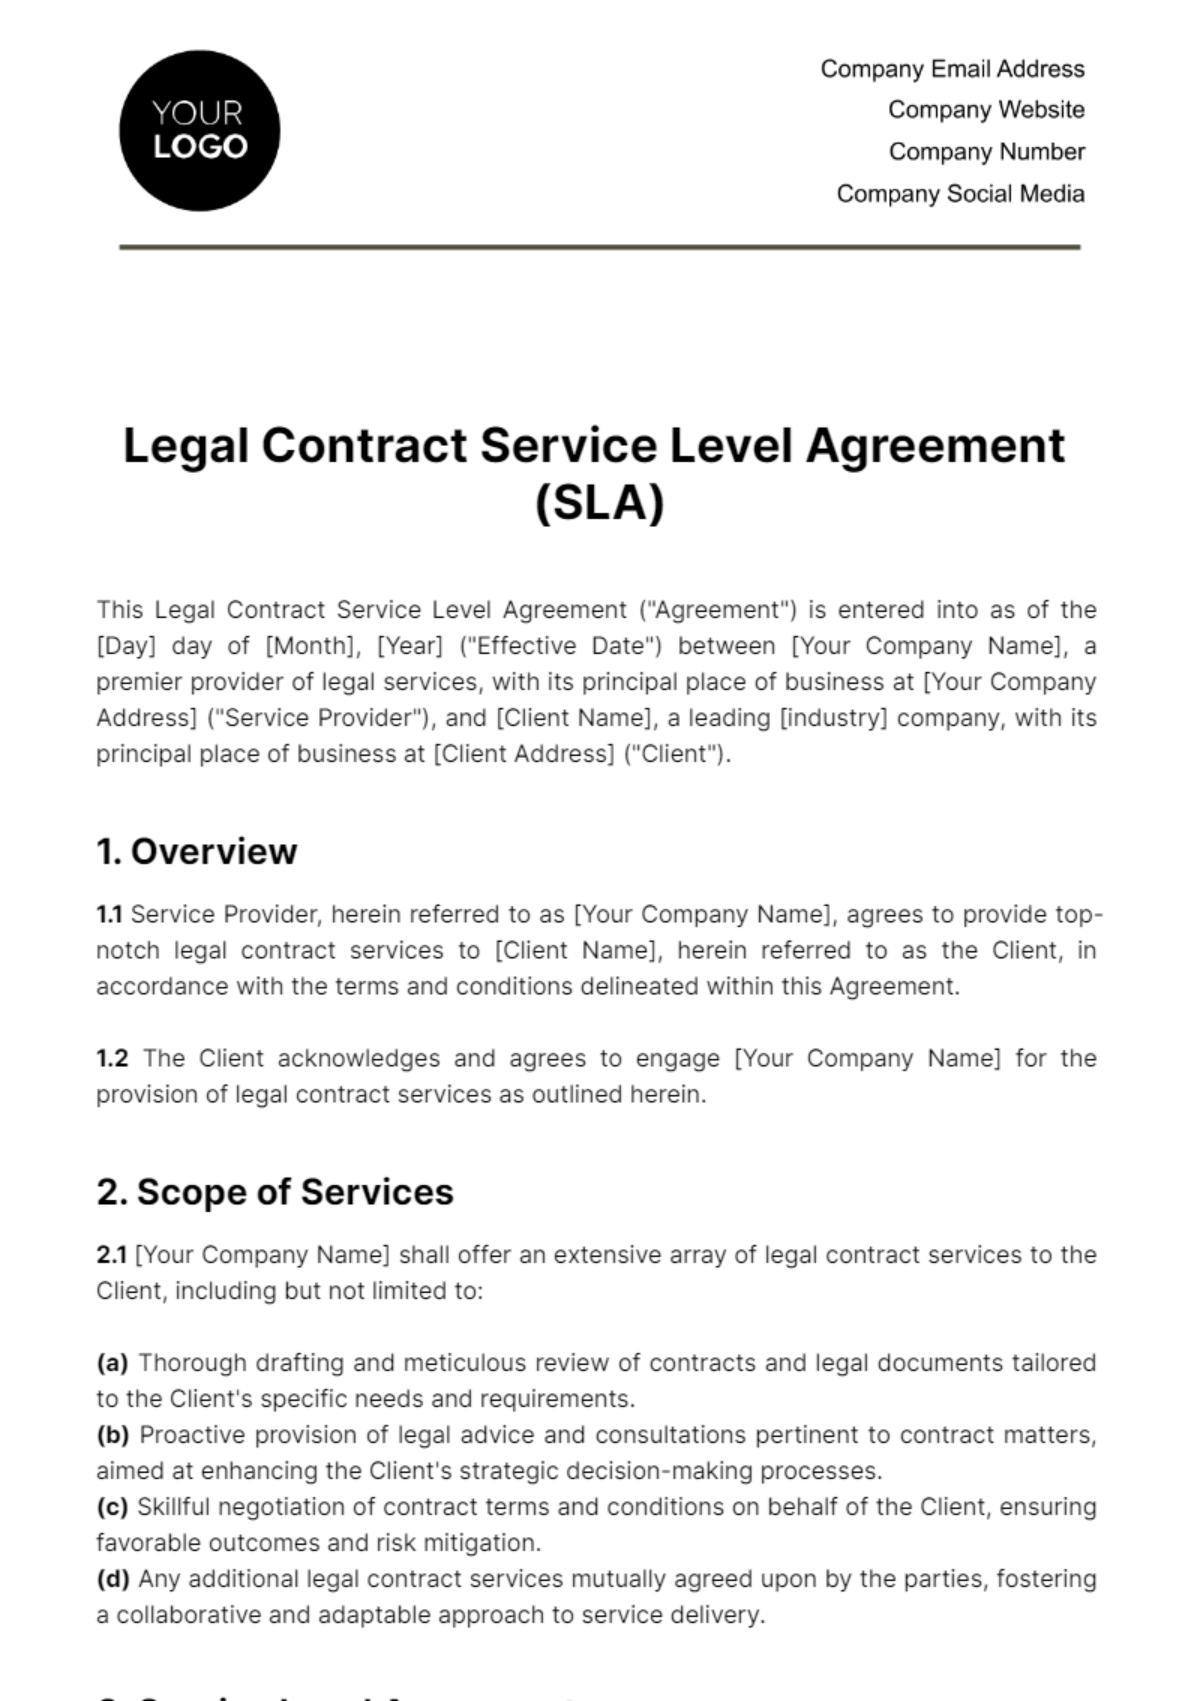 Legal Contract Service Level Agreement (SLA) Template